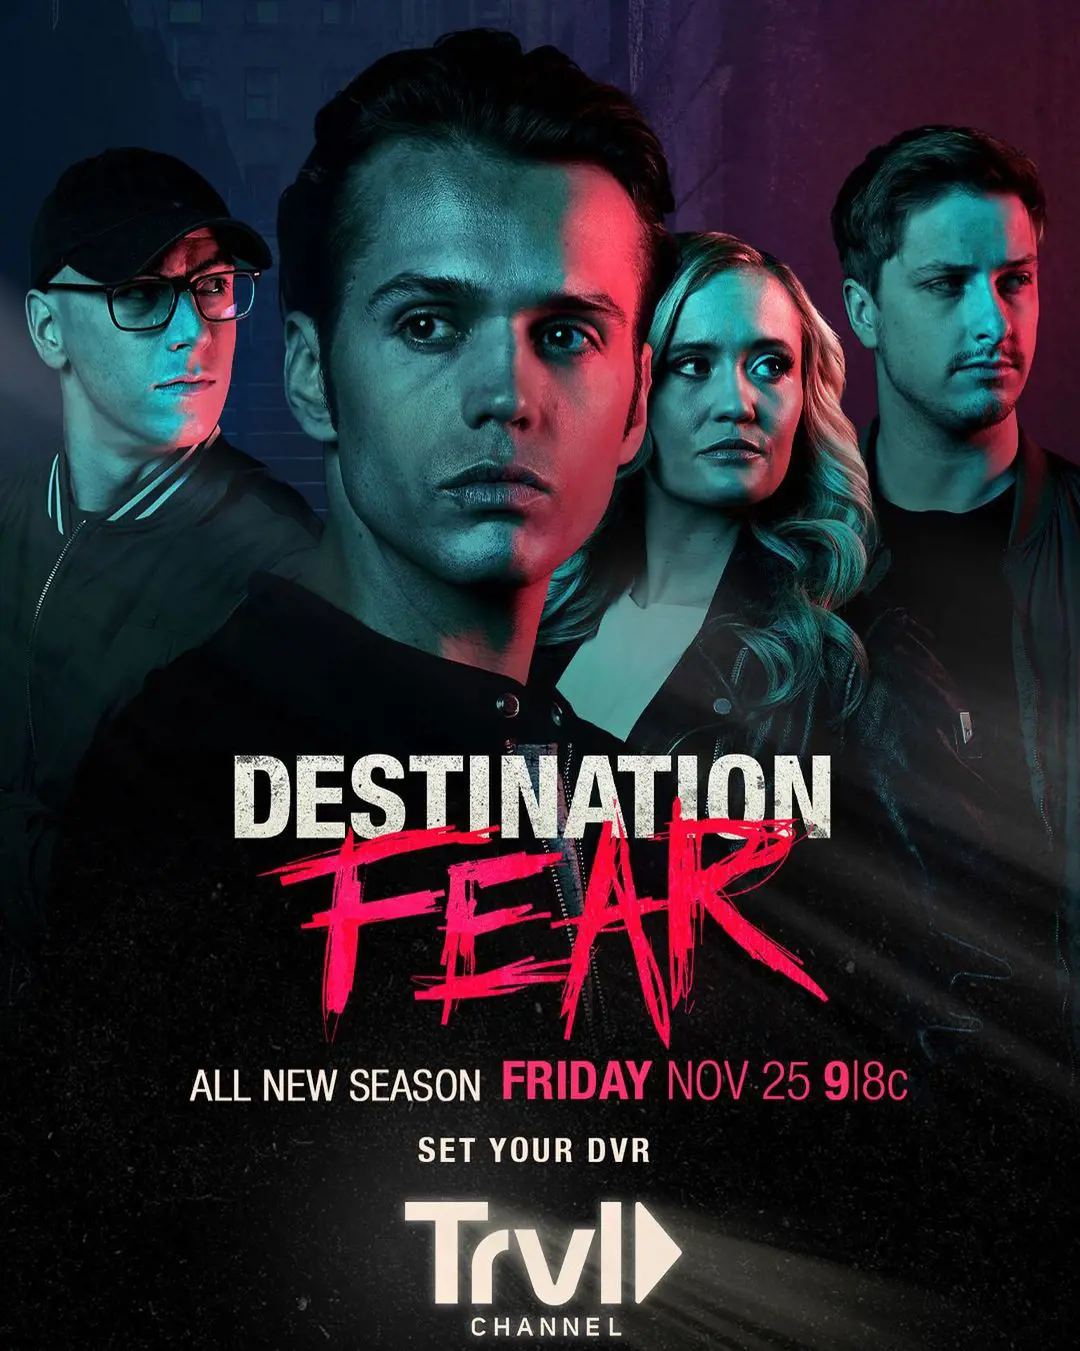 The Paranormal show Destination Fear premiered on October 26, 2019, on Travel Channel